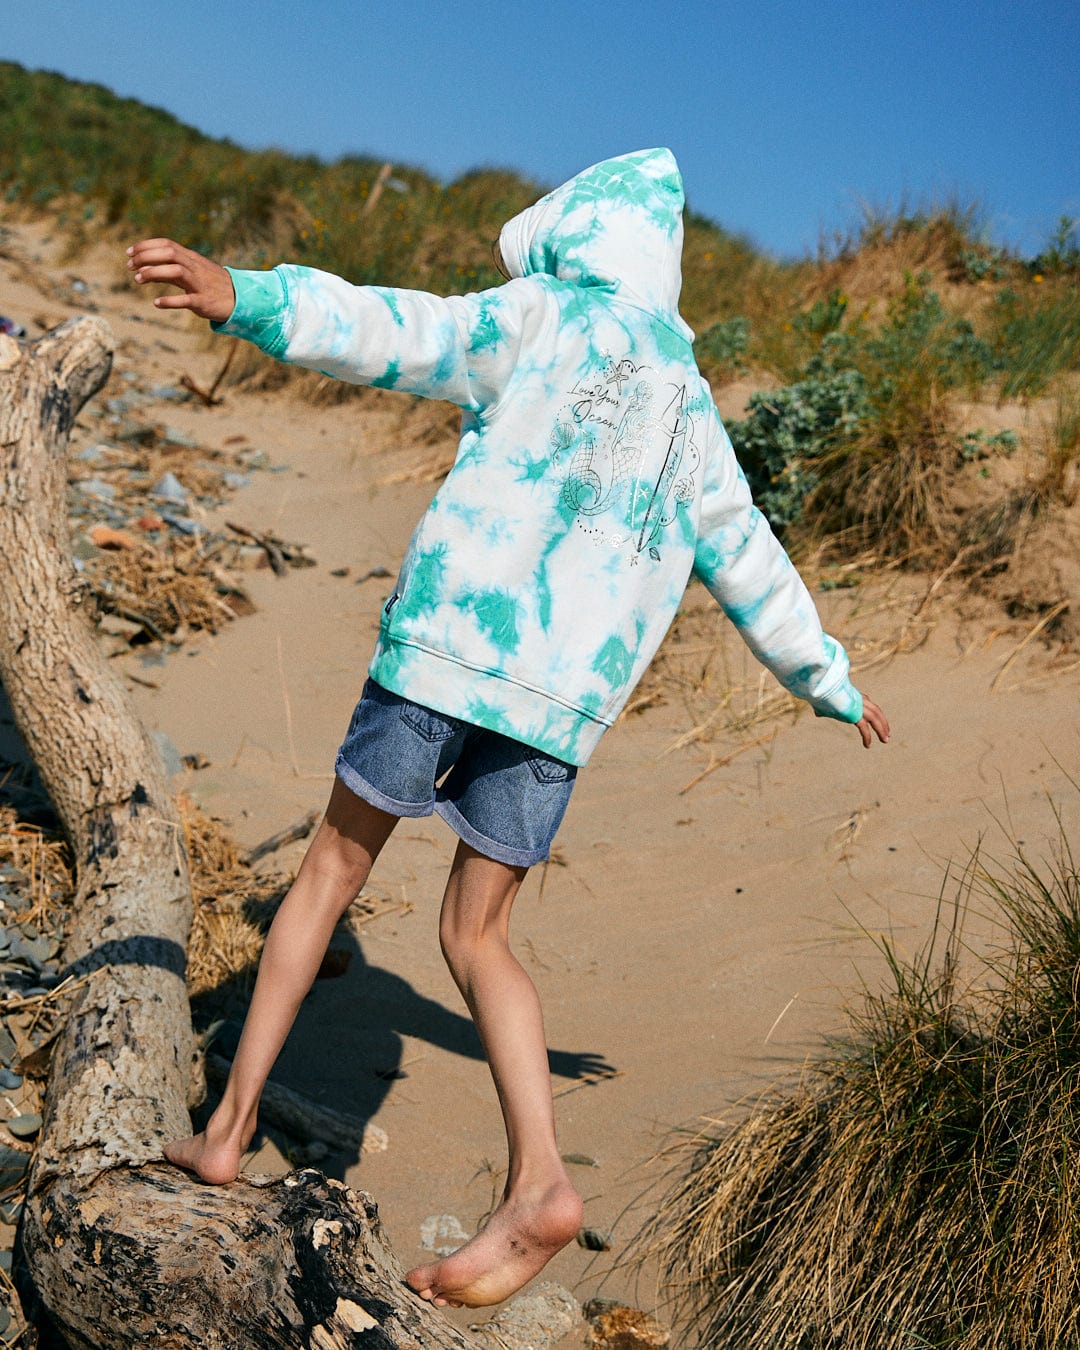 Person in a Saltrock Mermaid Surf - Kids Tie Dye Pop Hoodie - Turquoise/White and denim shorts balances barefoot on a log on a sandy beach.